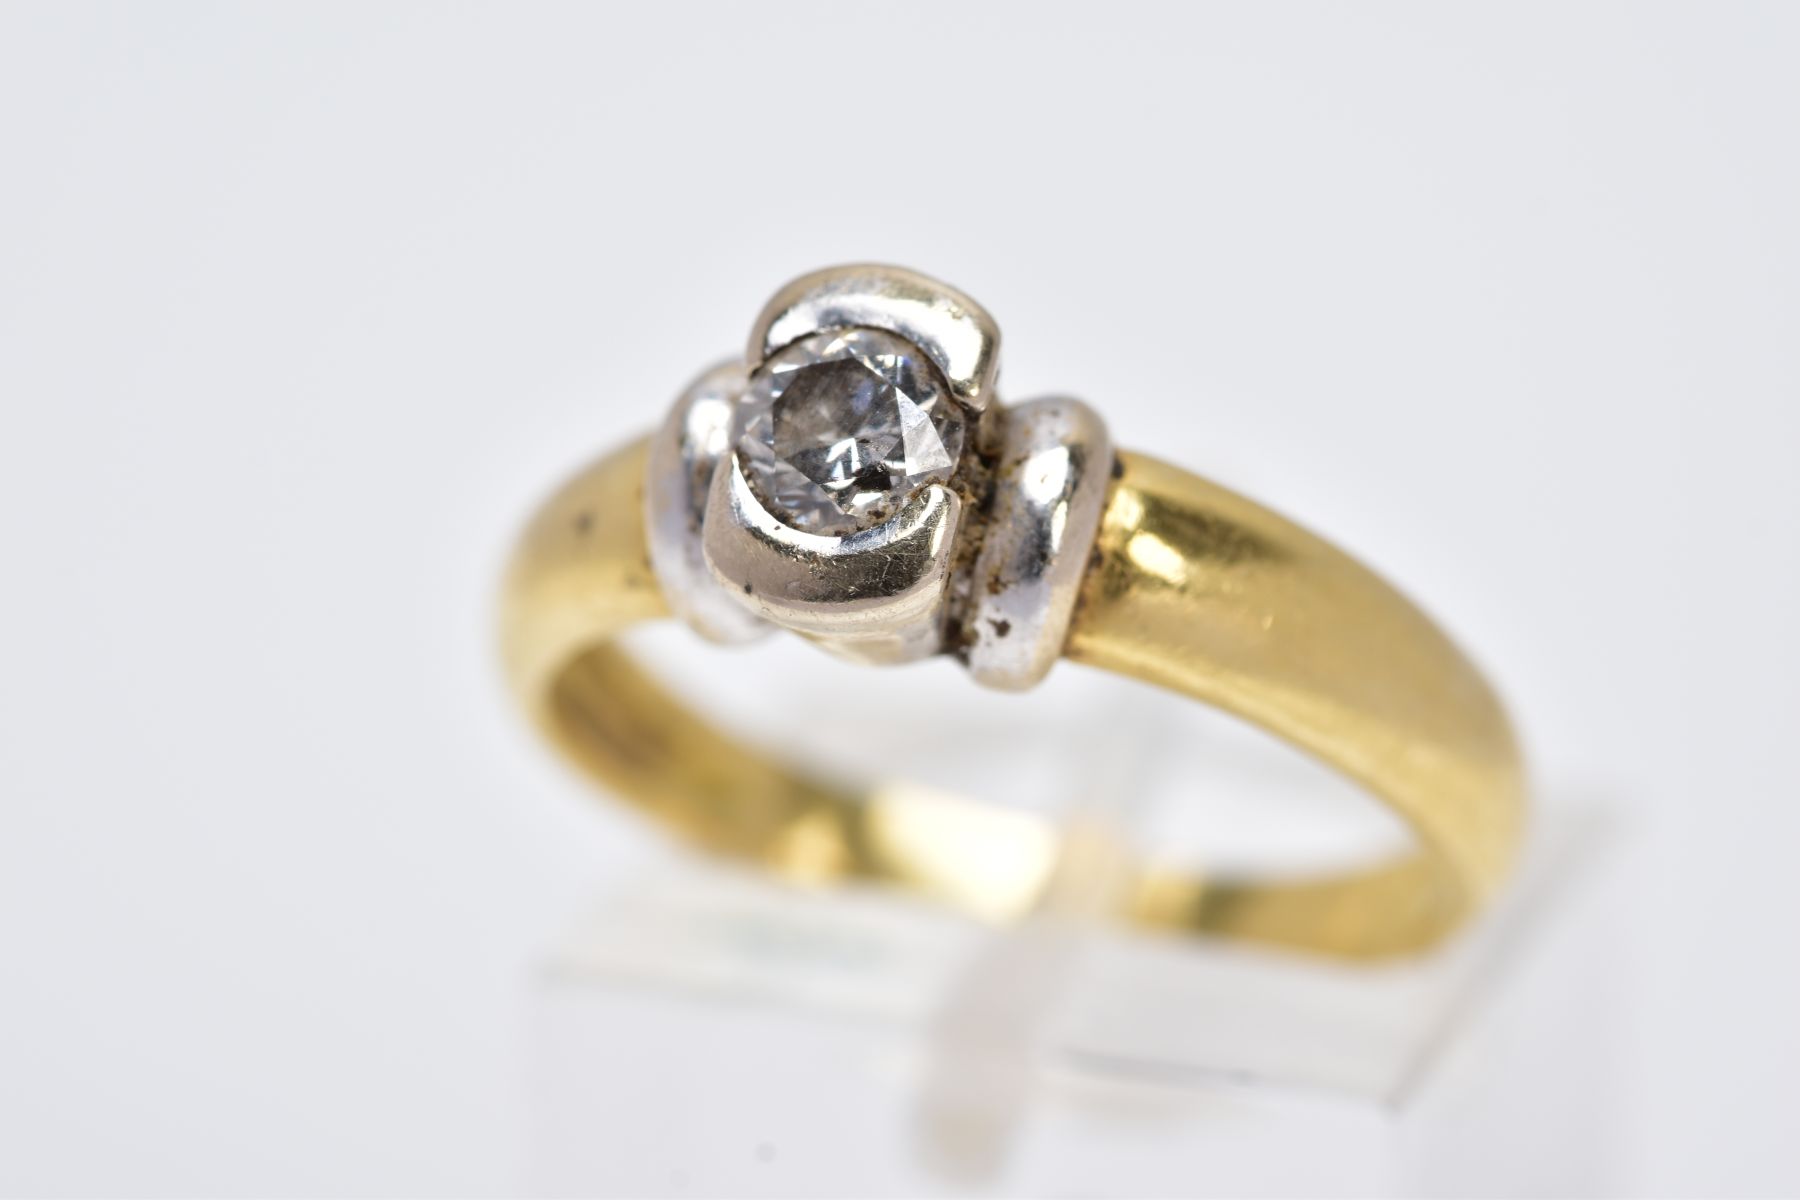 A YELLOW METAL SINGLE STONE DIAMOND RING, designed with a round brilliant cut diamond within a